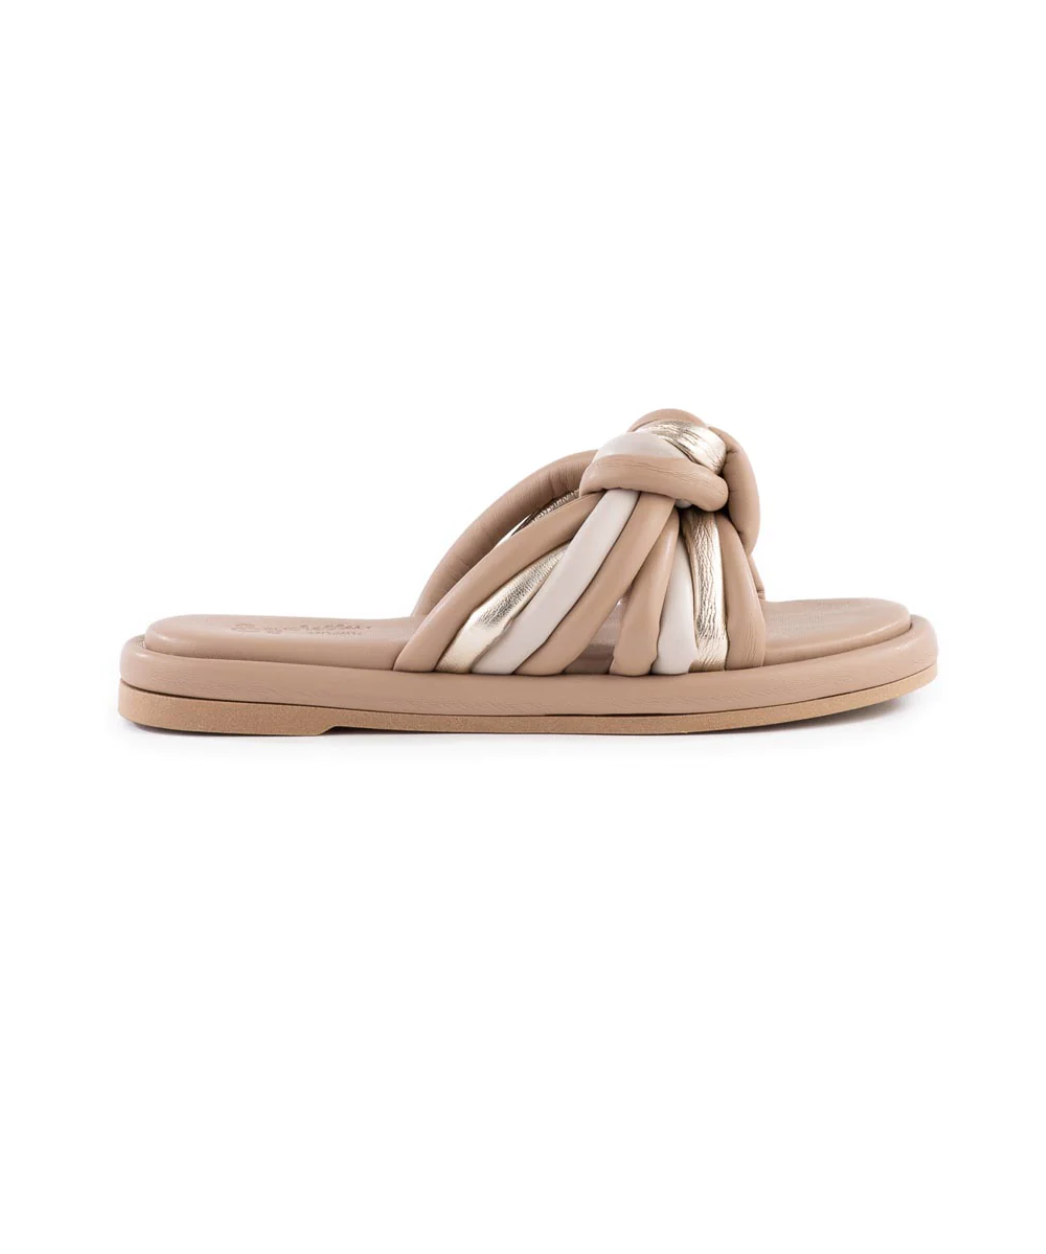 Simply The Best Sandal